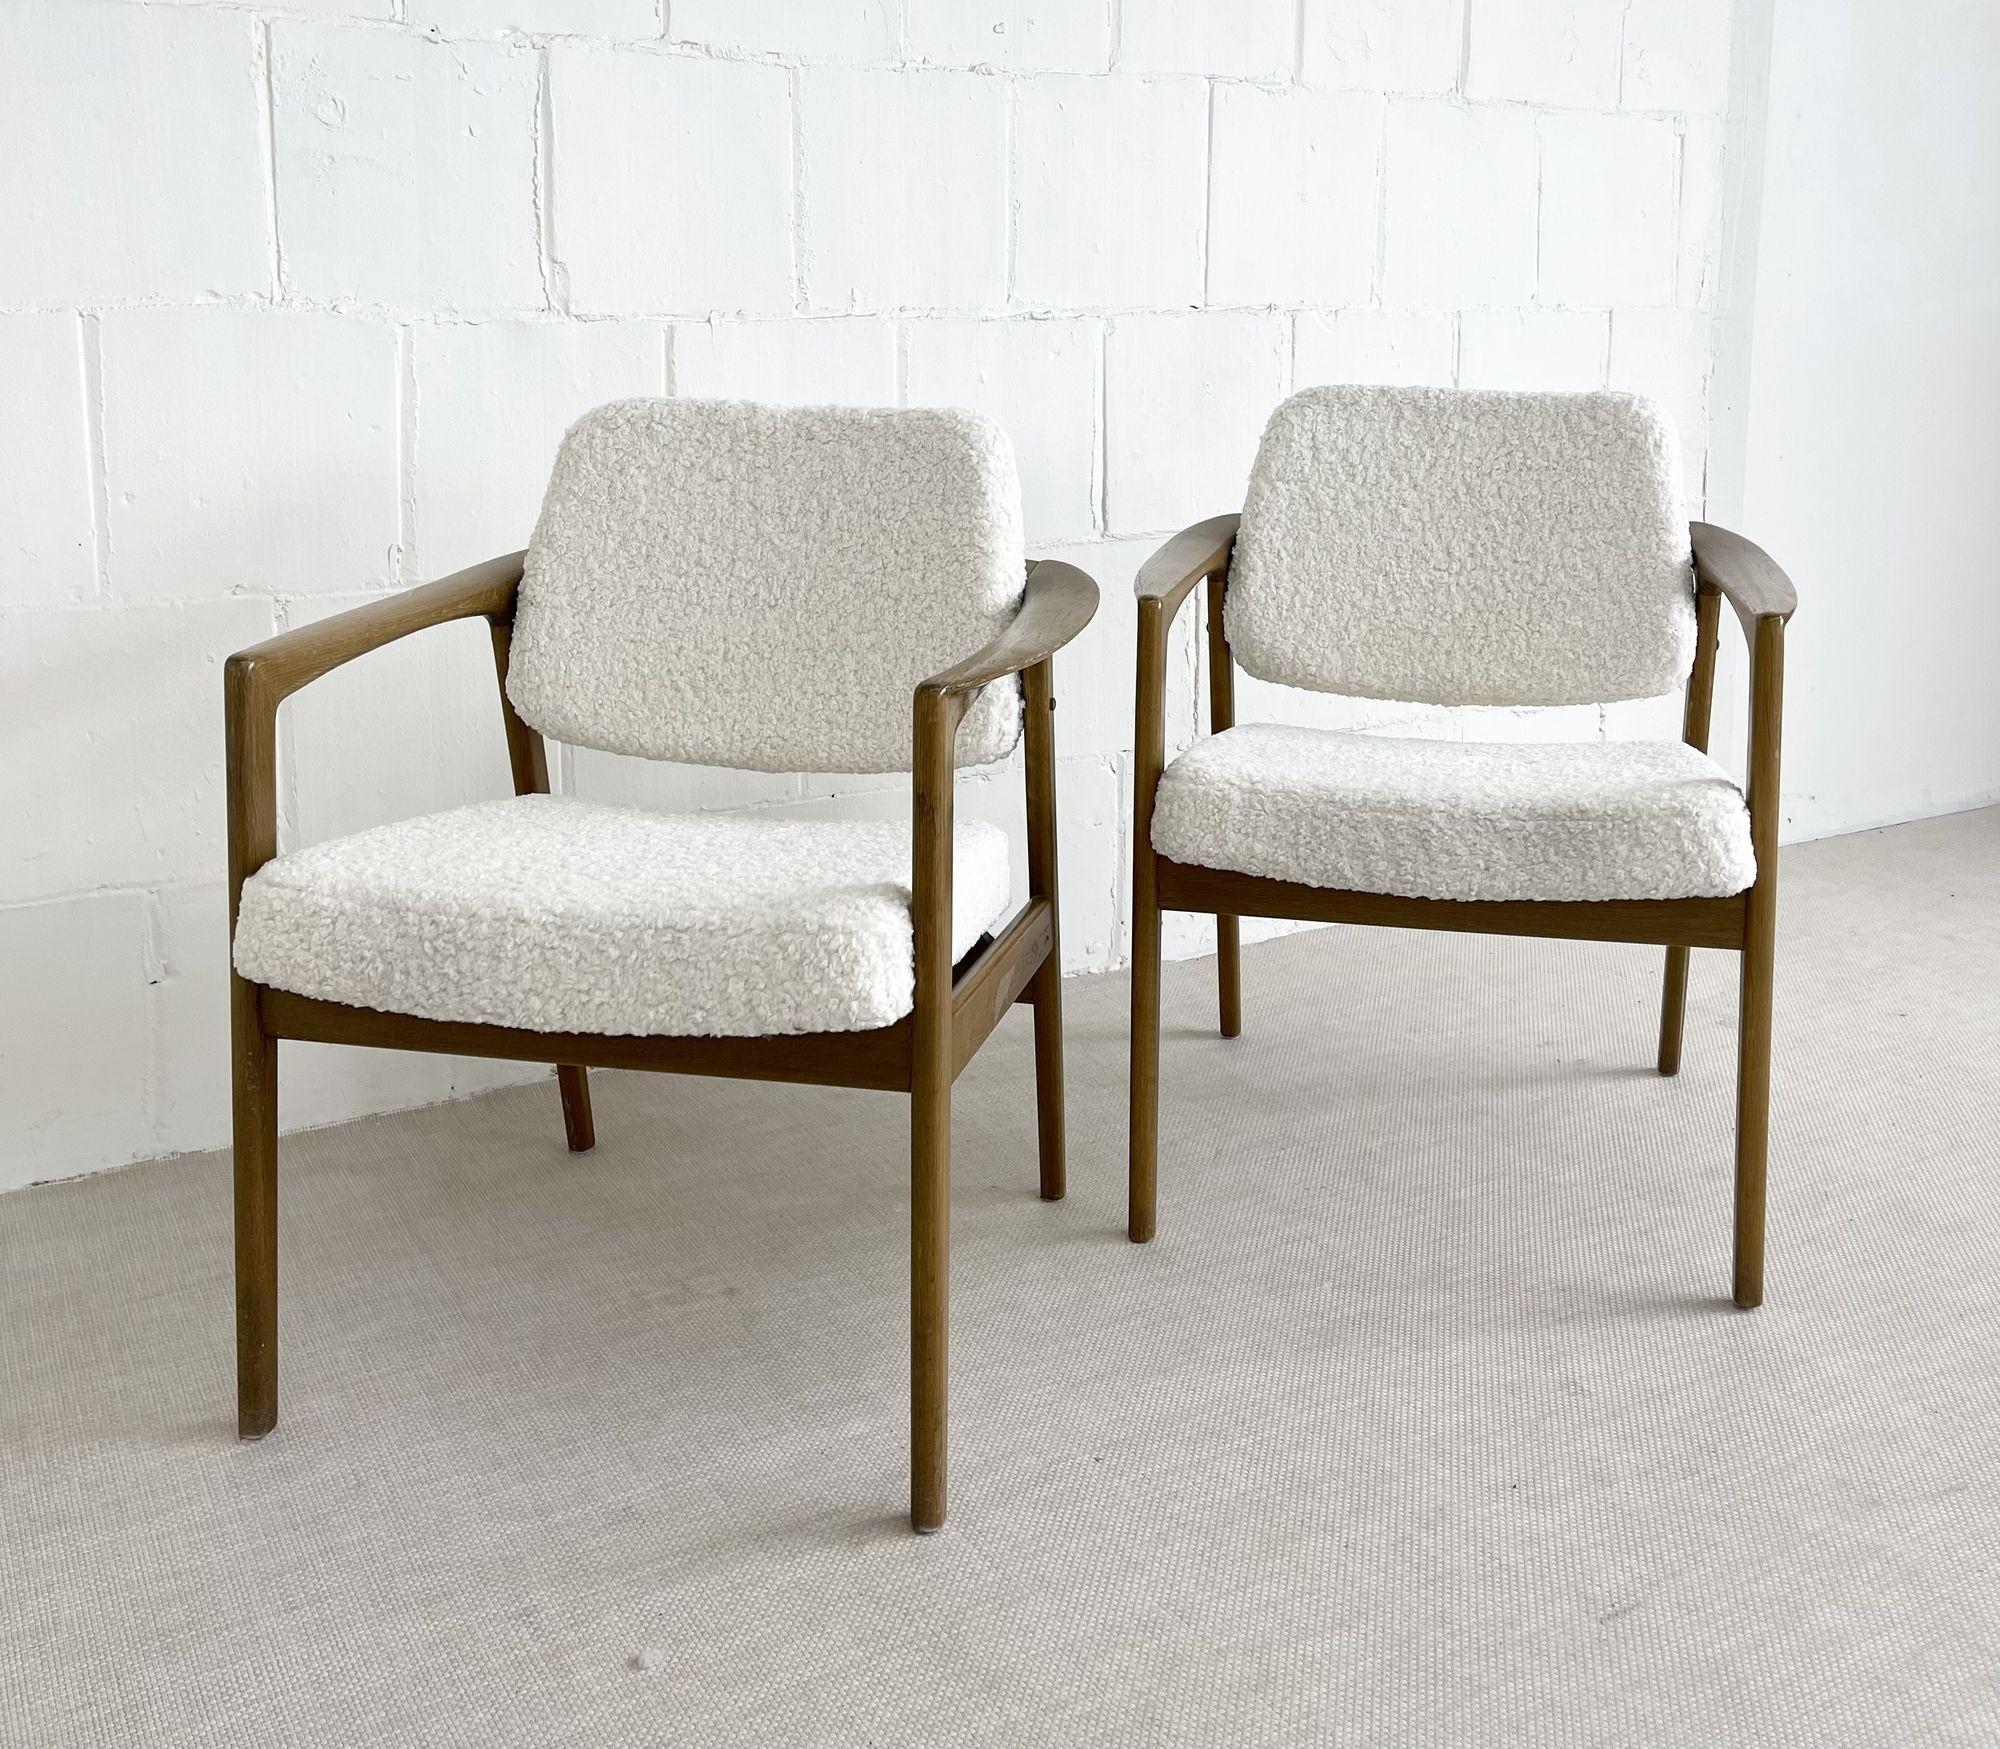 Swedish Designer, Mid-Century Accent Chairs, White Sheepskin, Oak, Sweden, 1960s In Good Condition For Sale In Stamford, CT